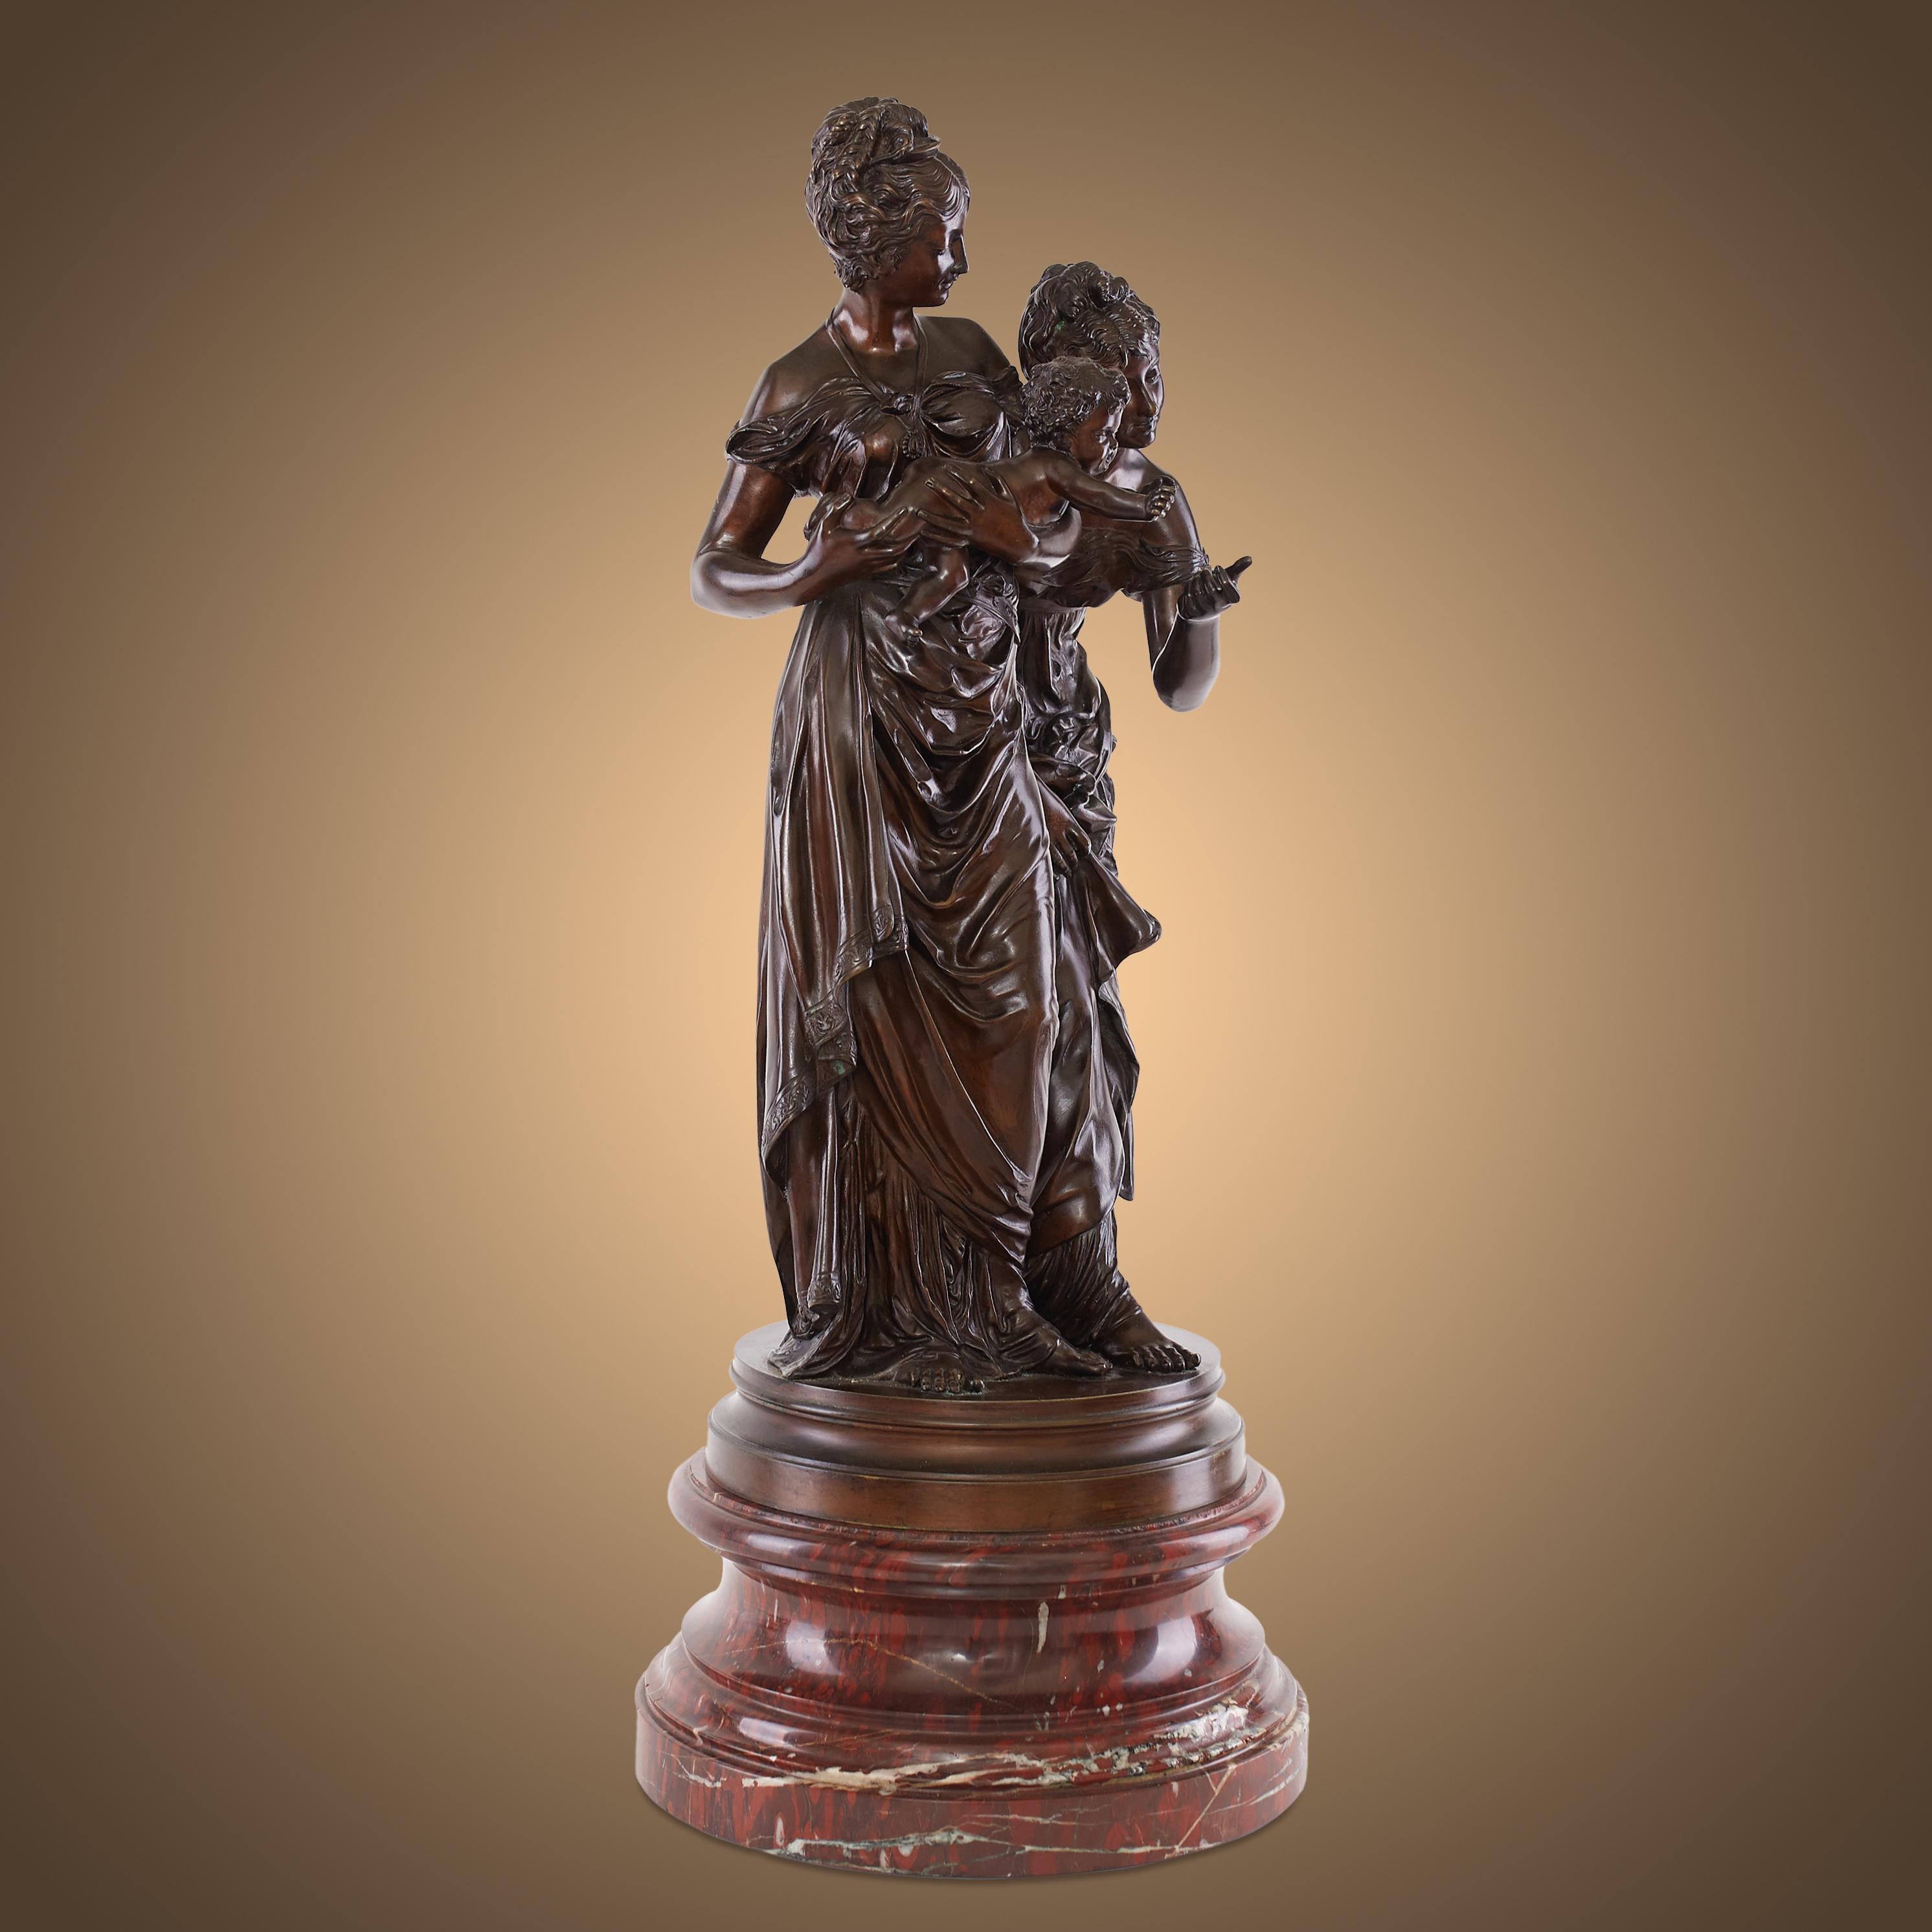 This is a bronze sculpture from the 19th century, exactly 1887, by the artist 